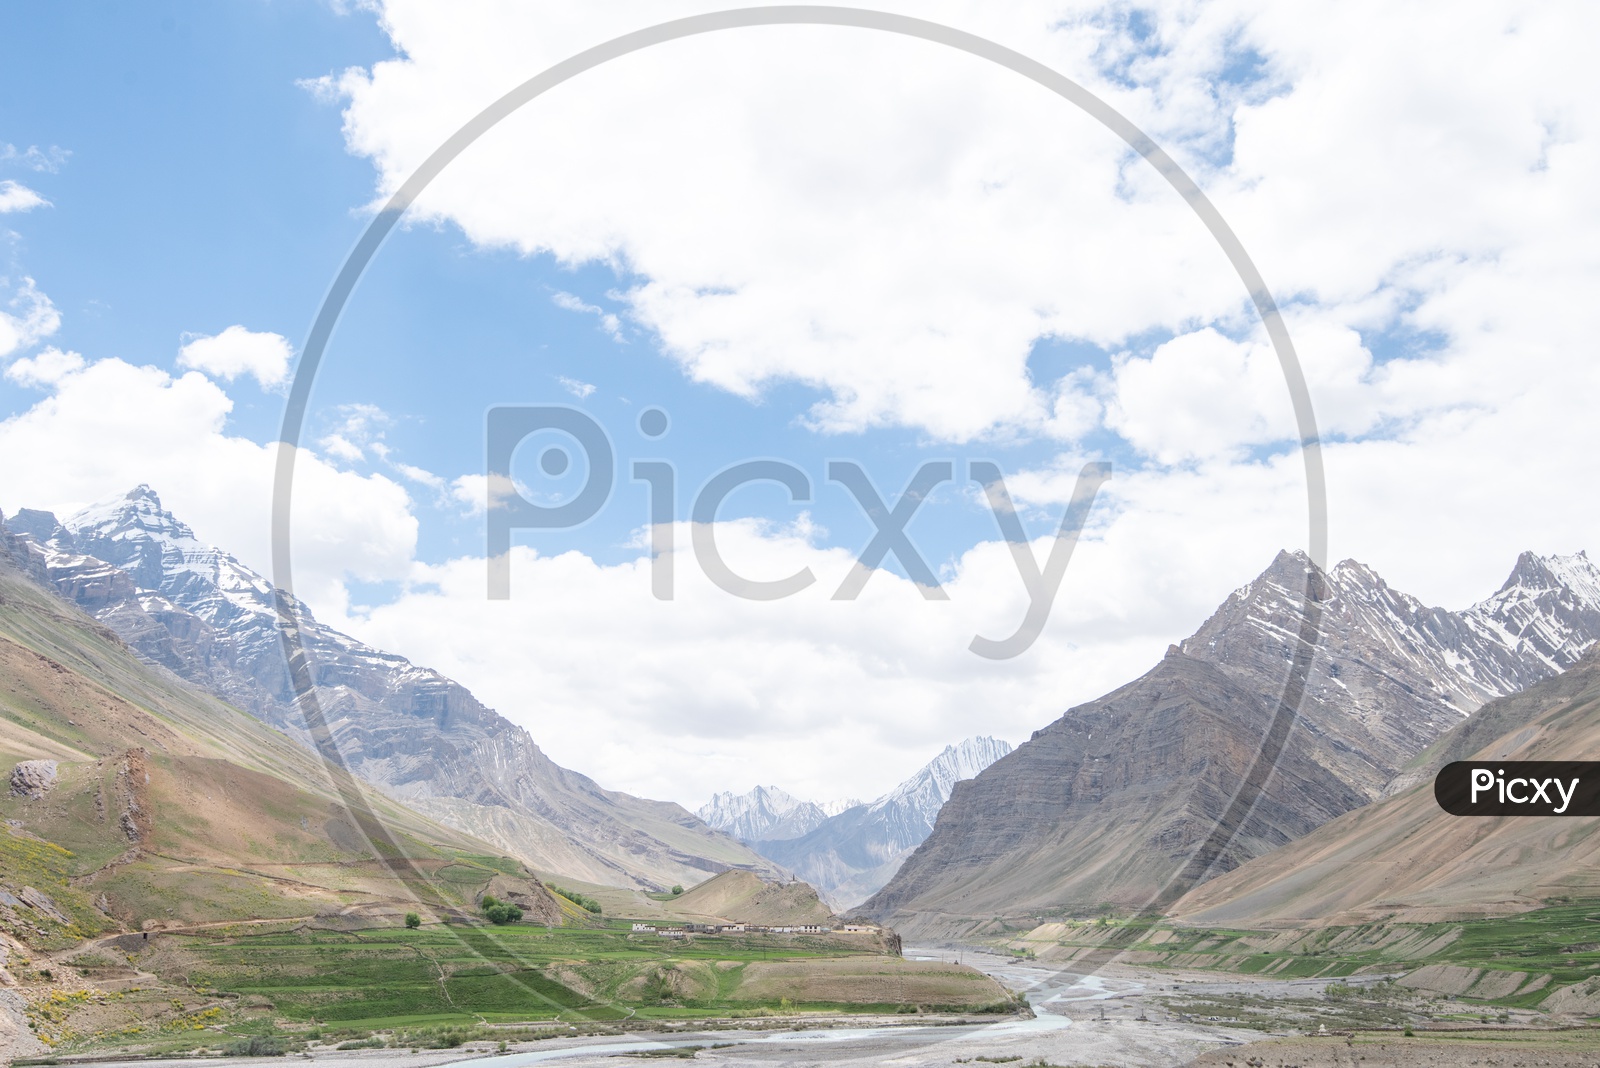 River in Spiti Valley with snow clad mountains in the background